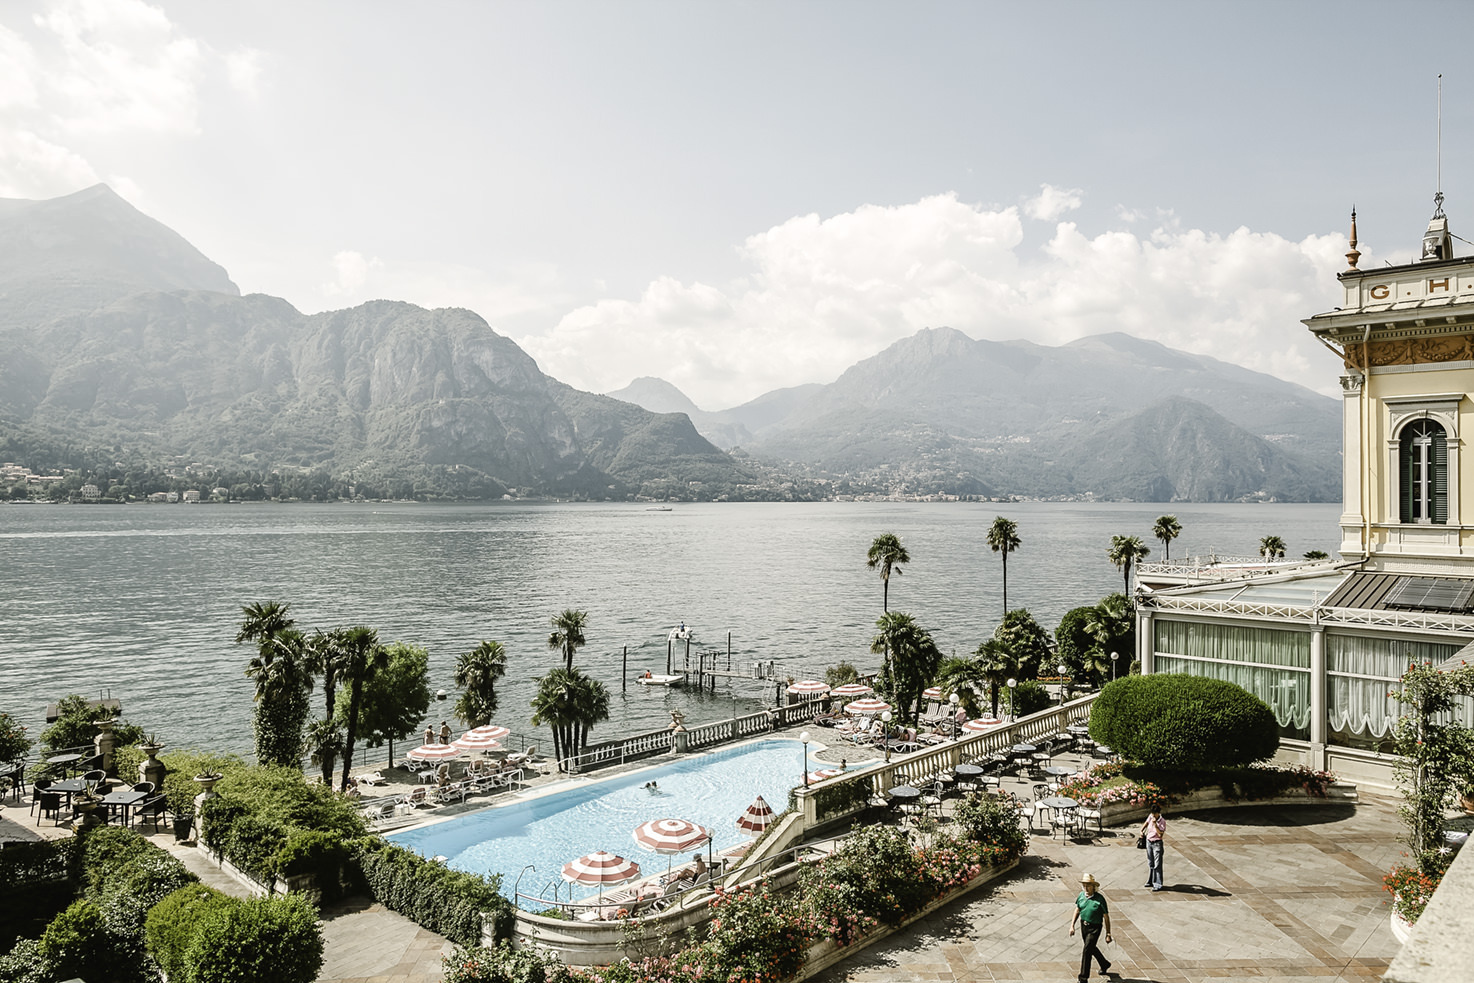 Overview of Grand Hotel Tremezzo with pool